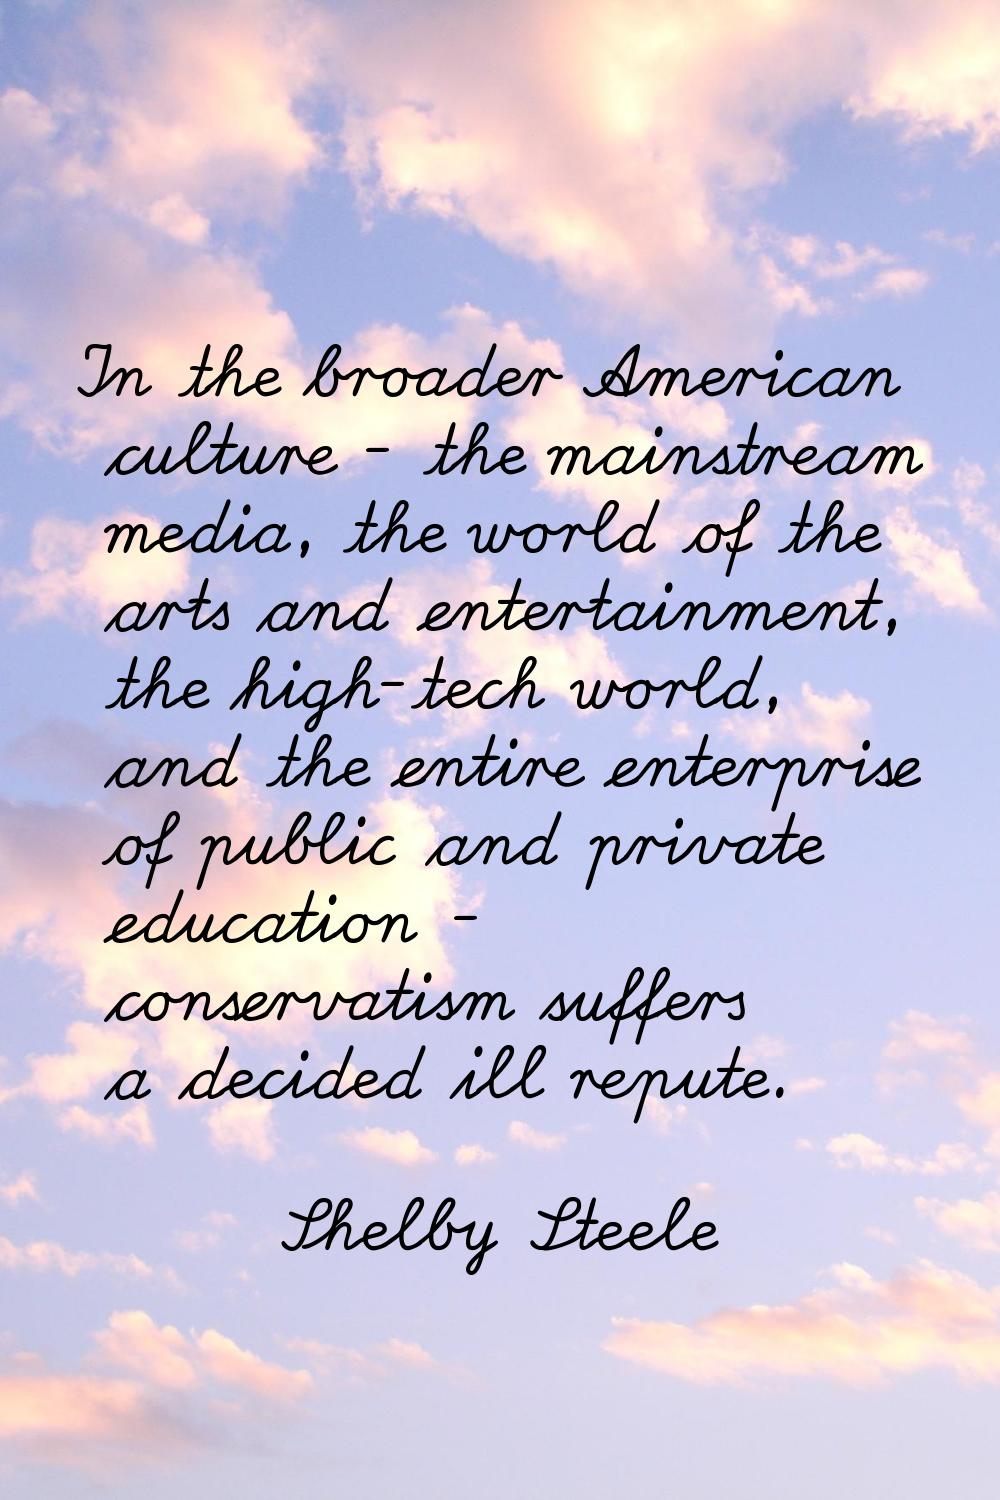 In the broader American culture - the mainstream media, the world of the arts and entertainment, th